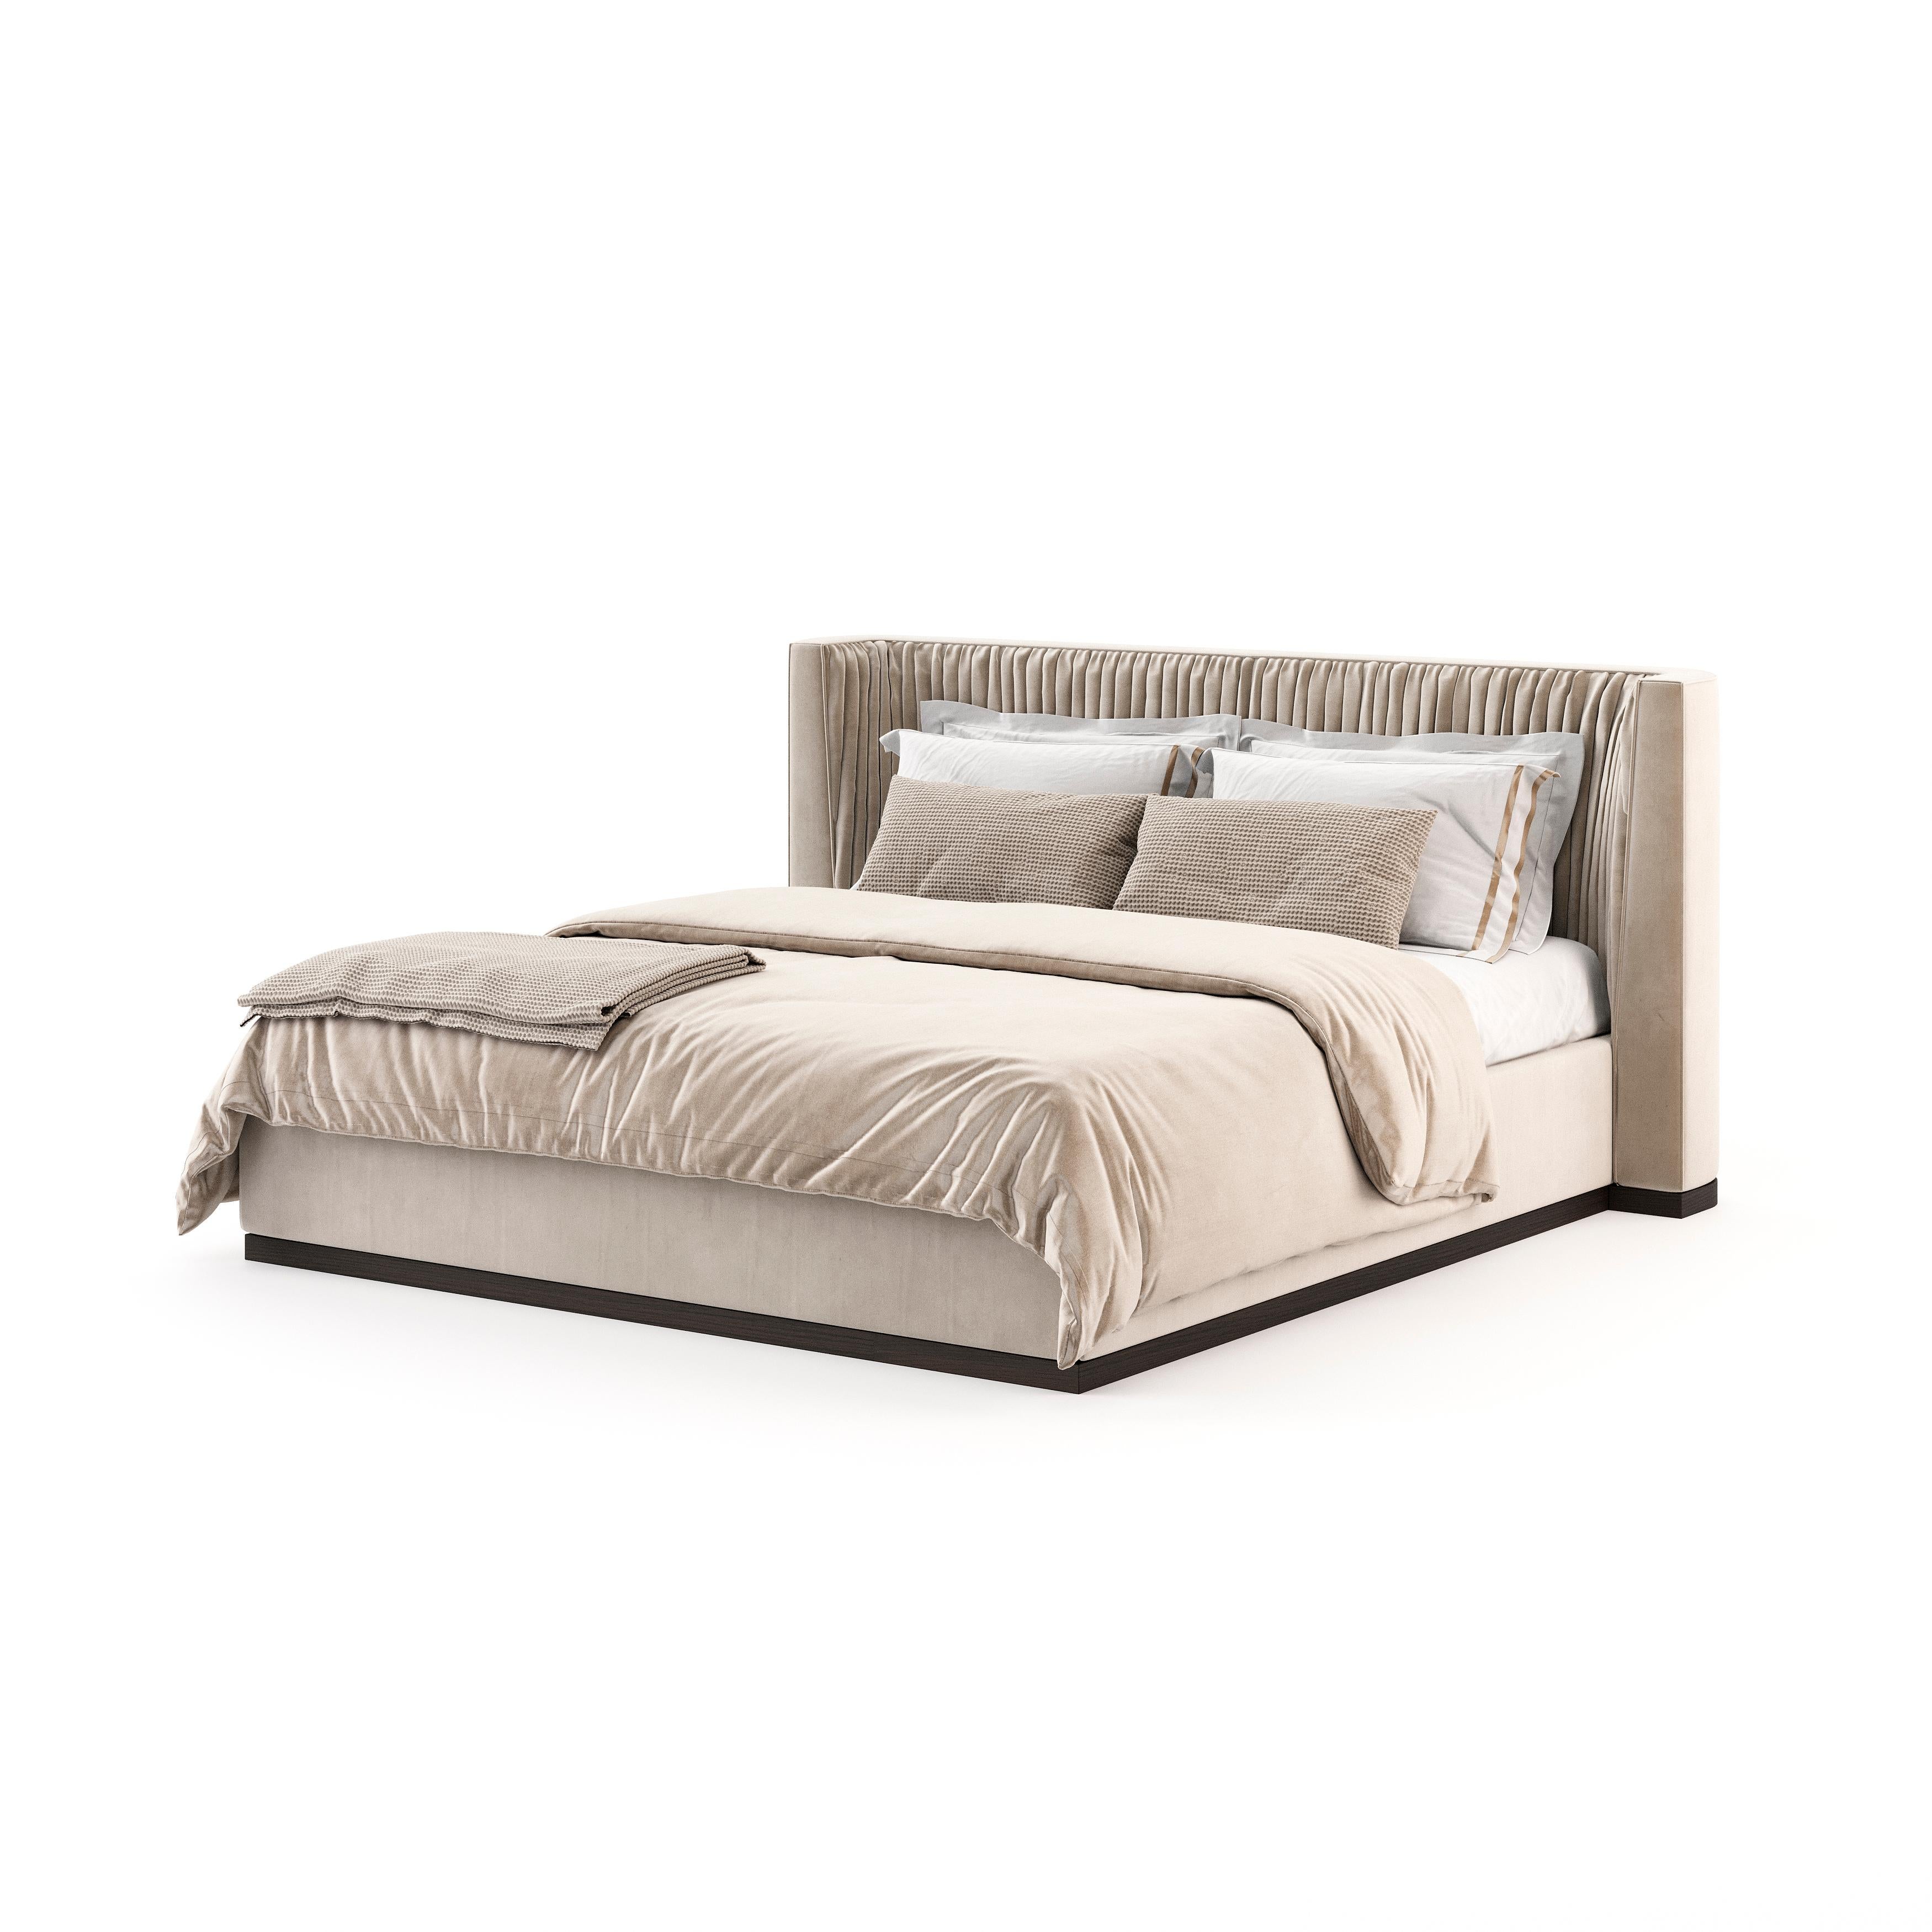 Miuzza bed is all you need to create the immersive sense of luxury associated with five-star hotels in your own home. Its upholstered headboard features a stylish pattern, perfect for adding texture to any bedroom. 

* Available in different